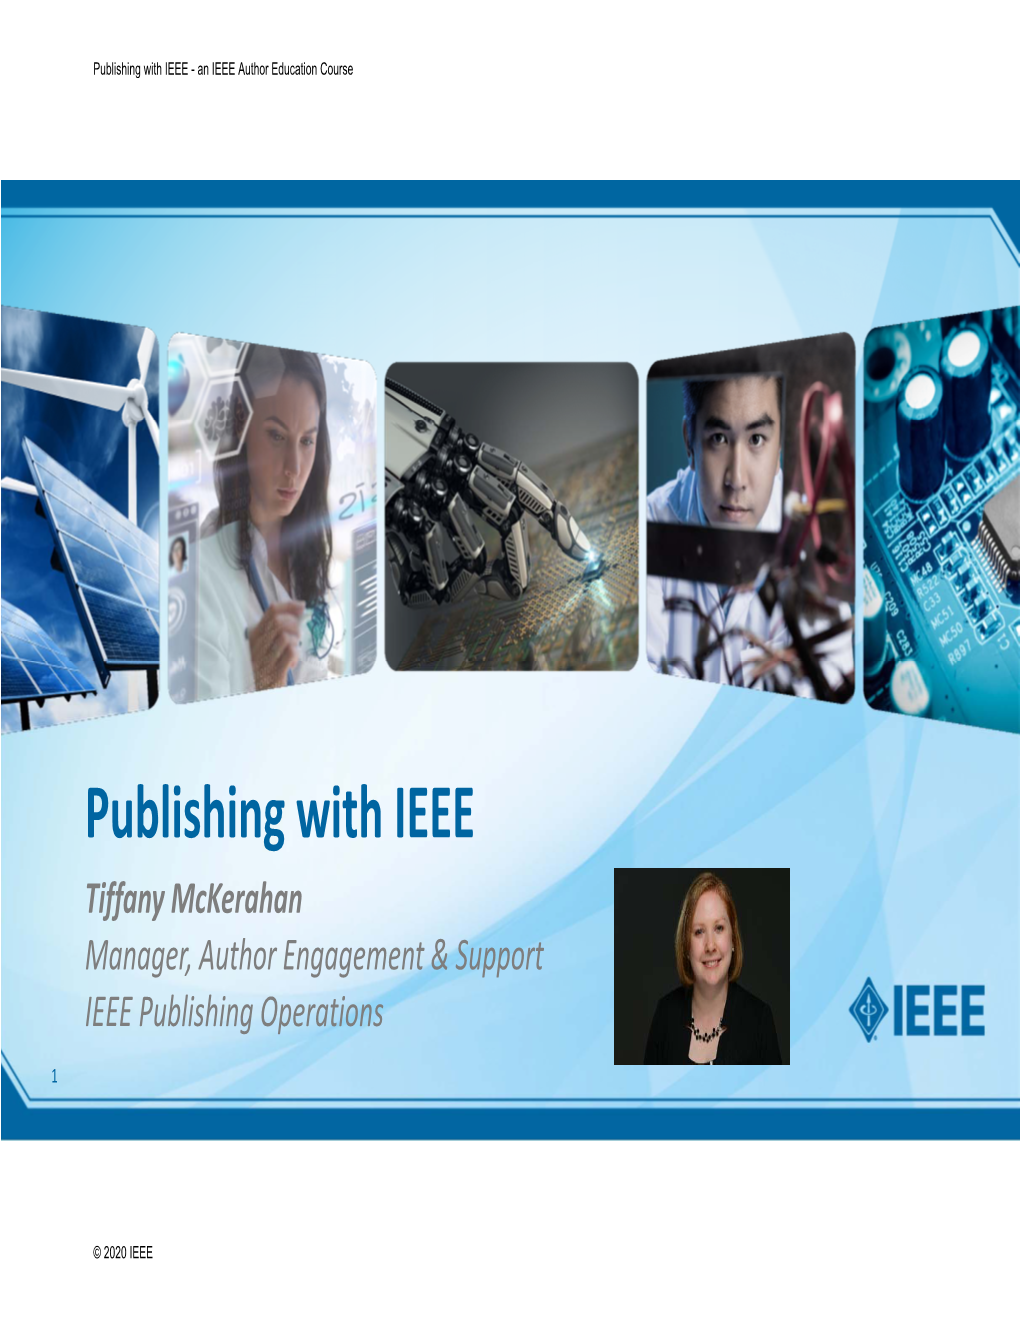 Publishing with IEEE - an IEEE Author Education Course